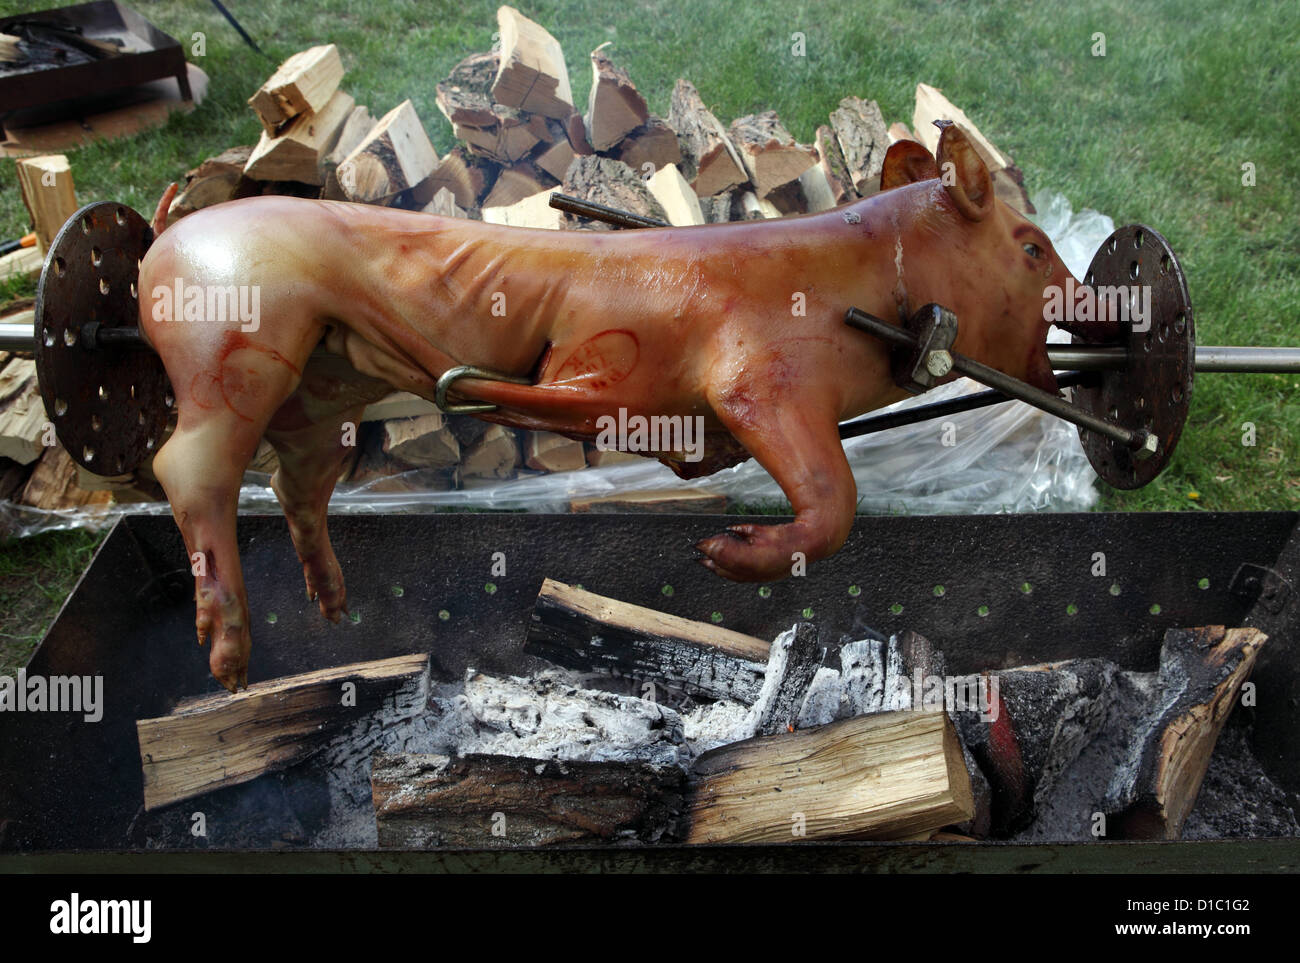 Suckling pig is roasted on a spit over open fire on wood burning stove  Stock Photo - Alamy